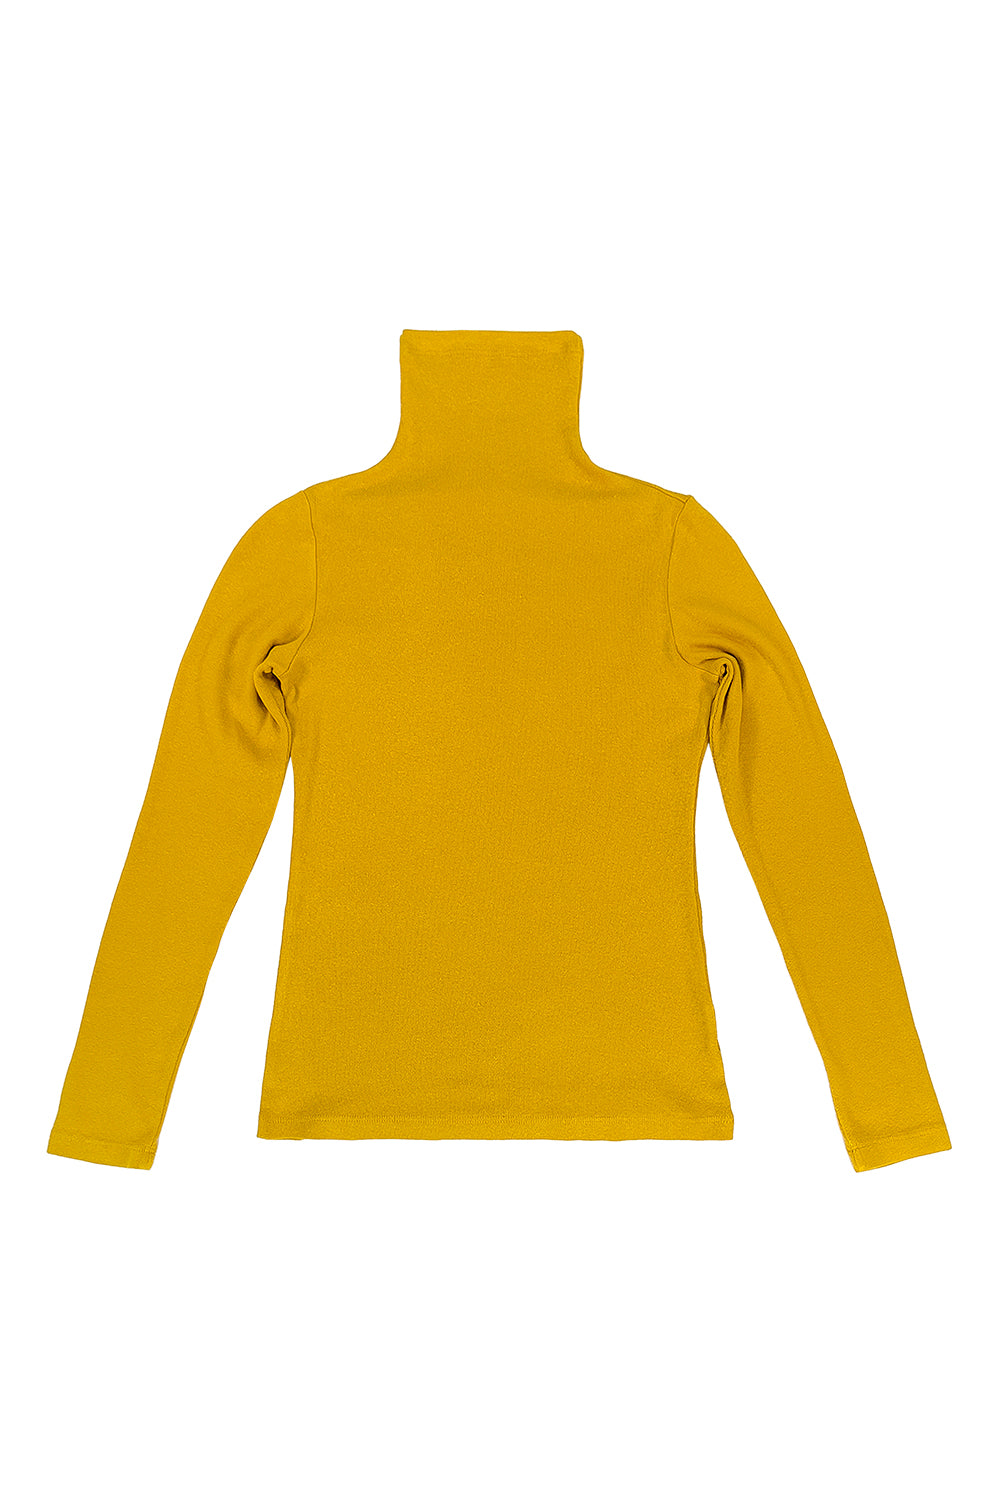 Whidbey Turtleneck | Jungmaven Hemp Clothing & Accessories / Color: Spicy Mustard